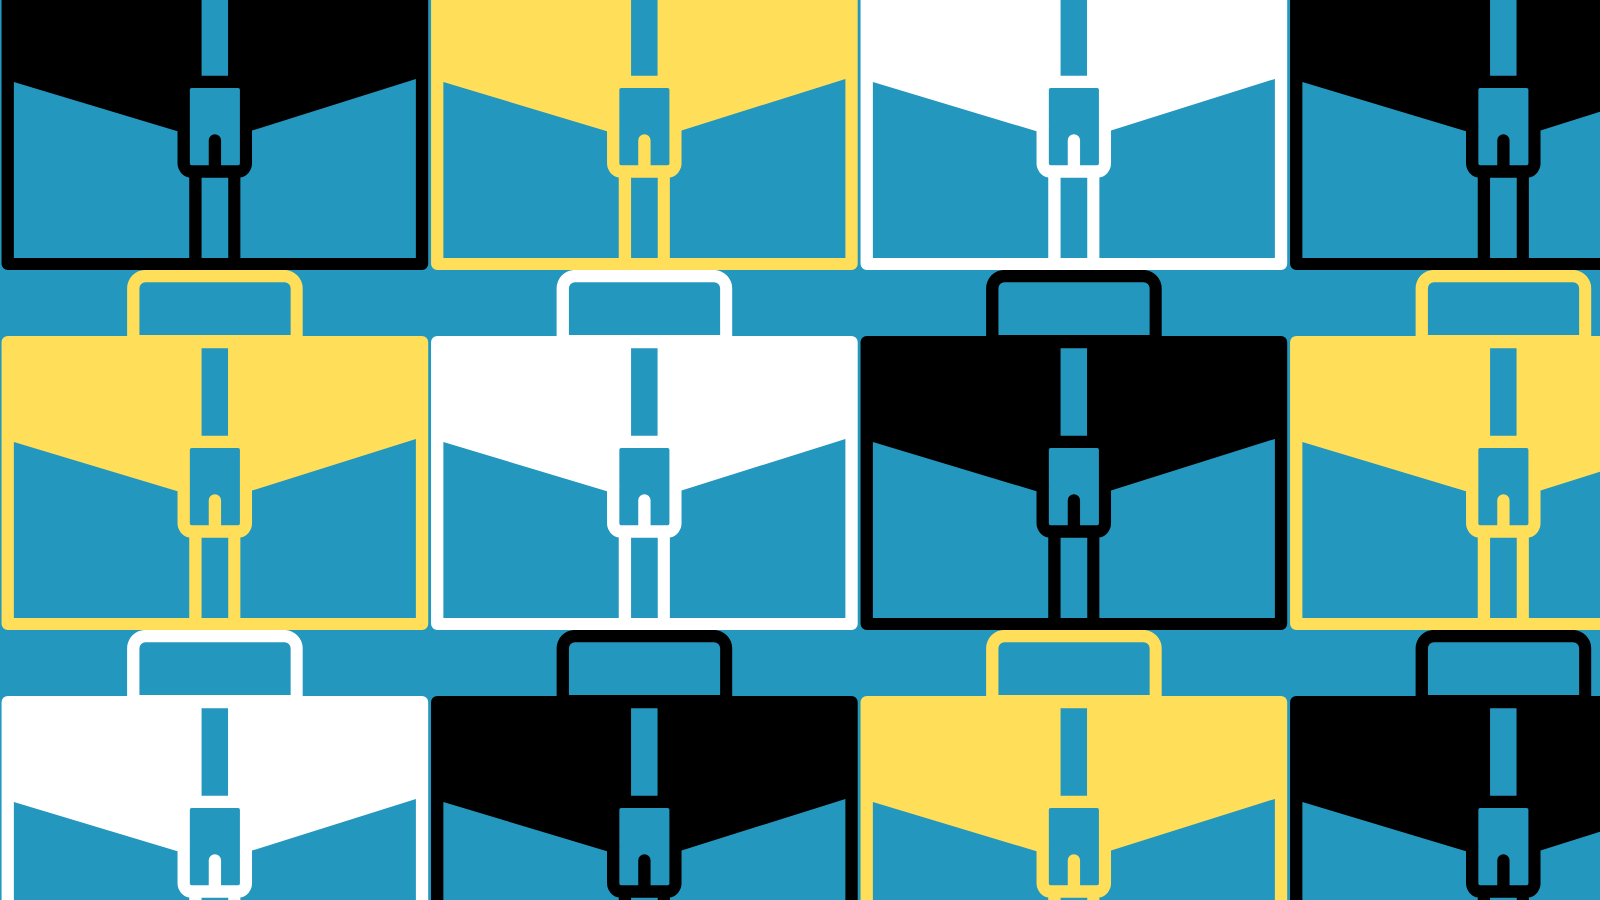 A pattern or minimalist briefcase graphics